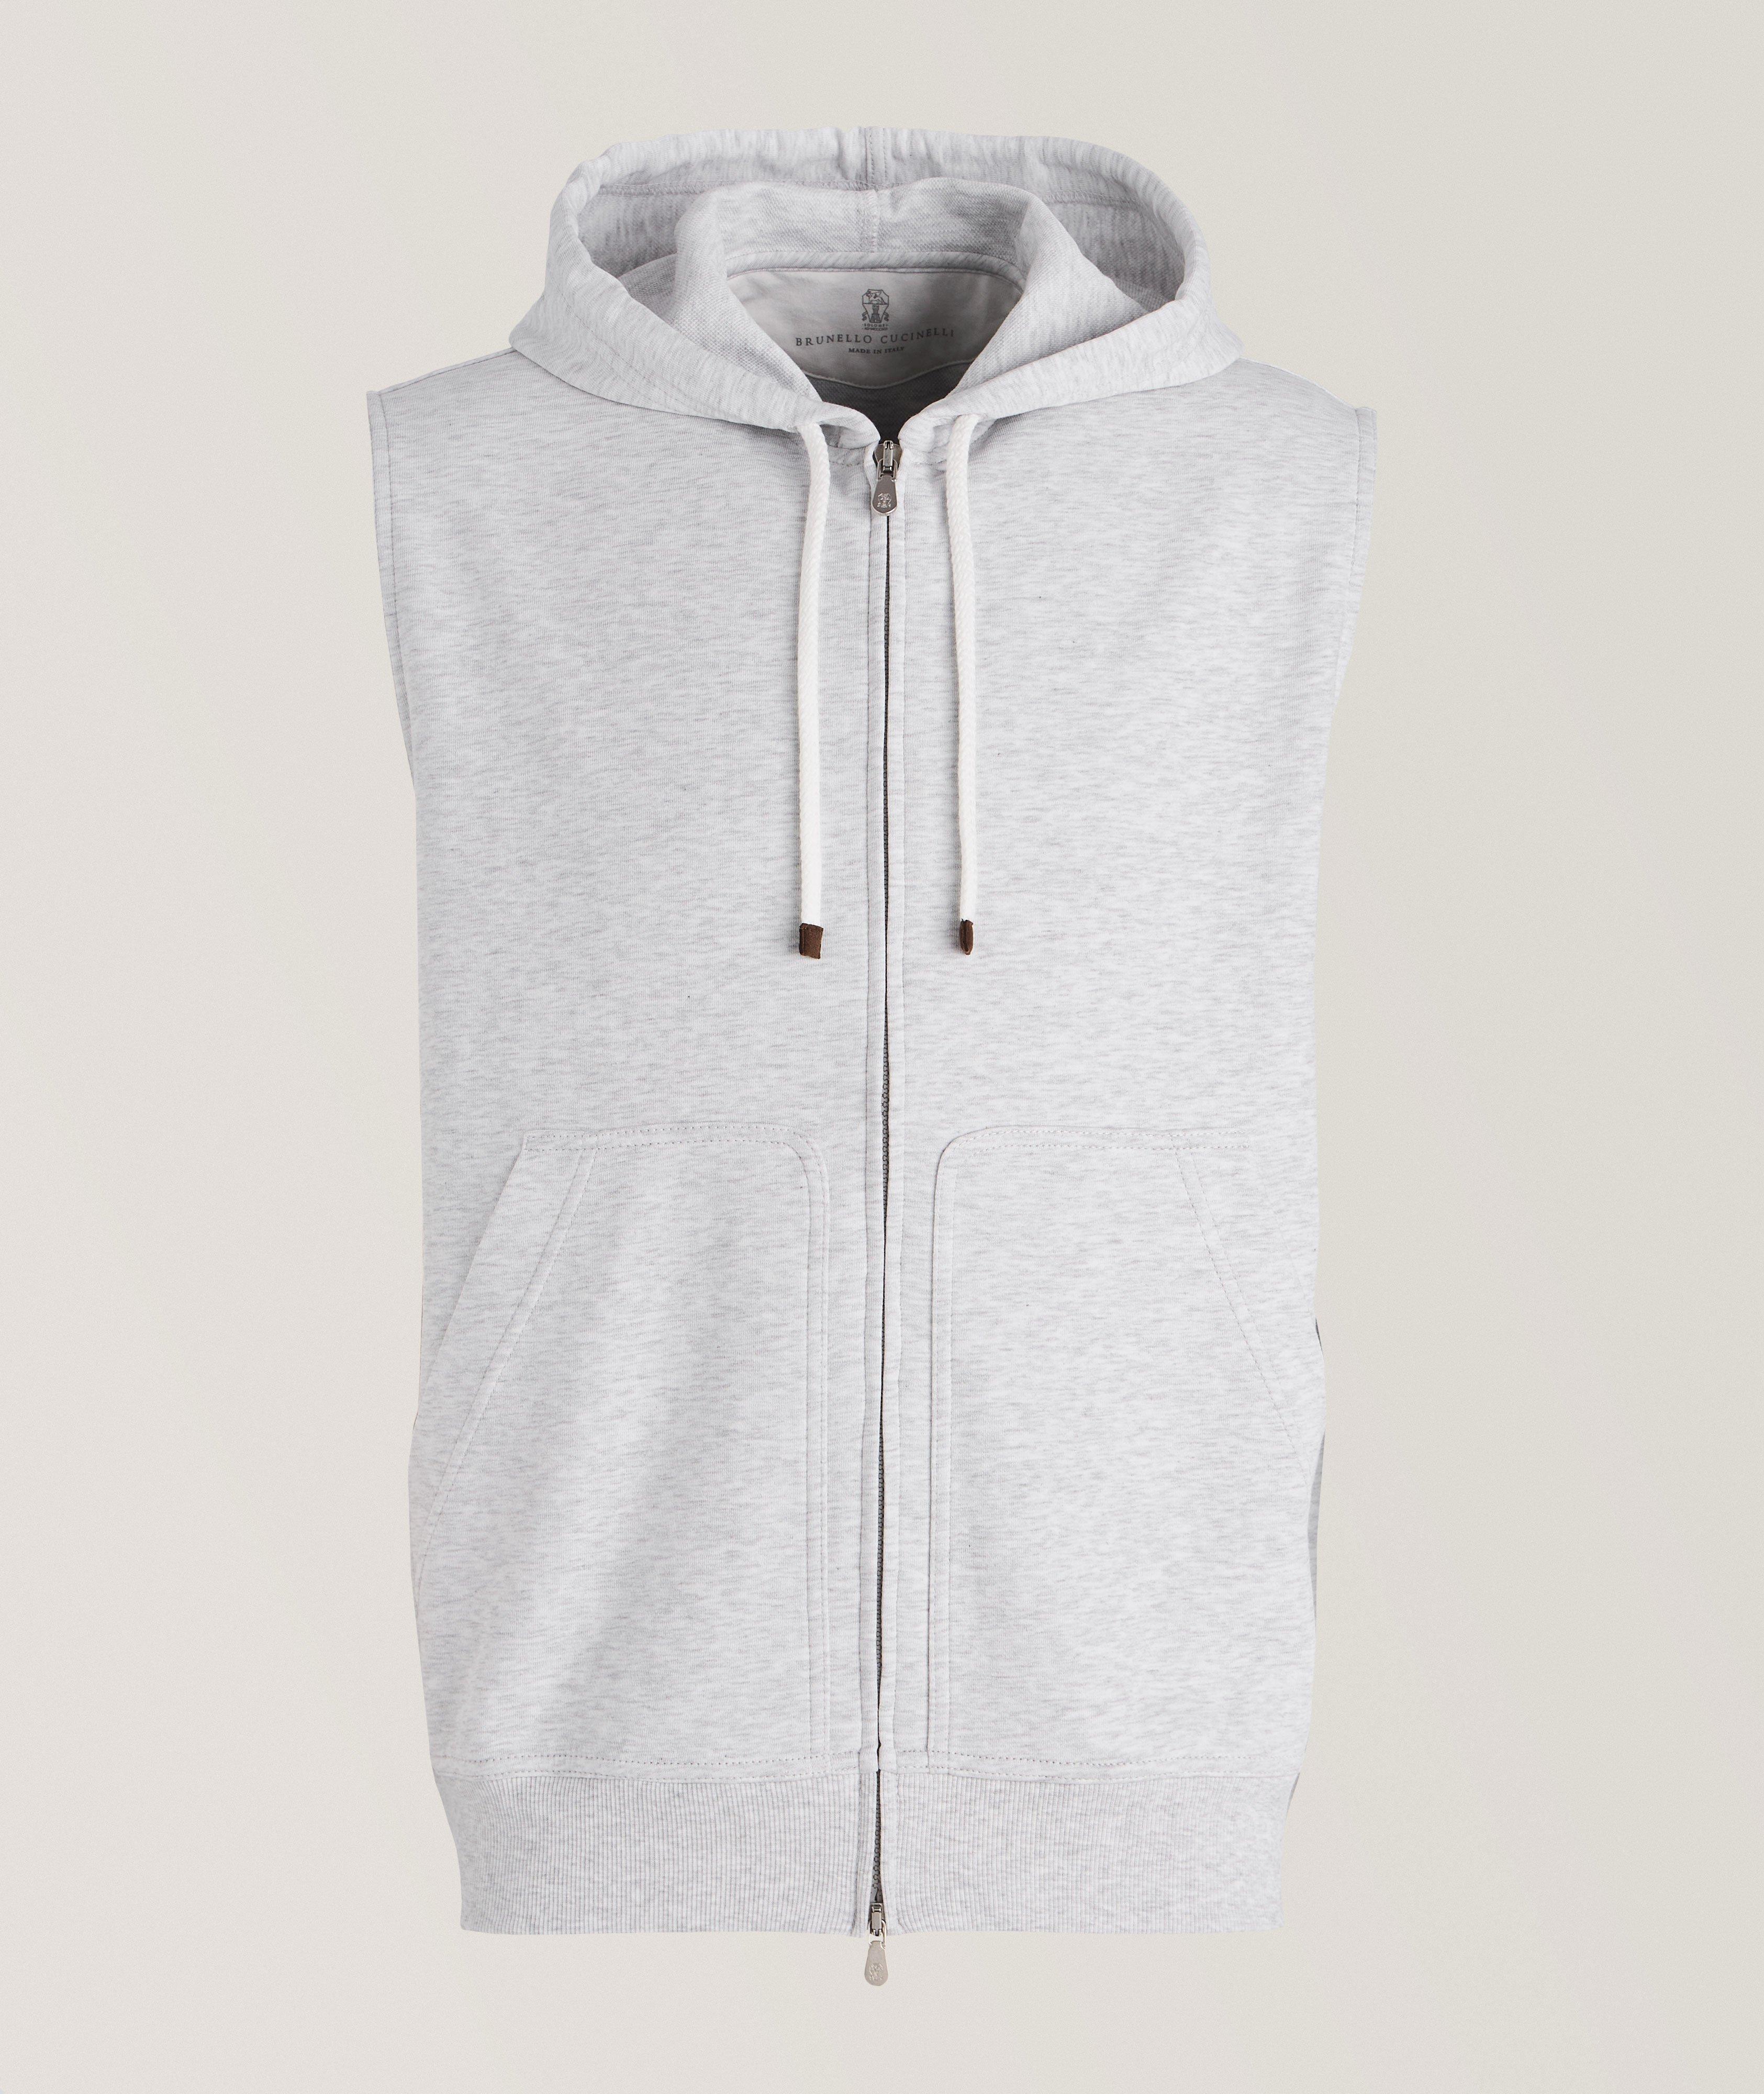 Travelwear Collection Hooded French Terry Cotton Vest image 0